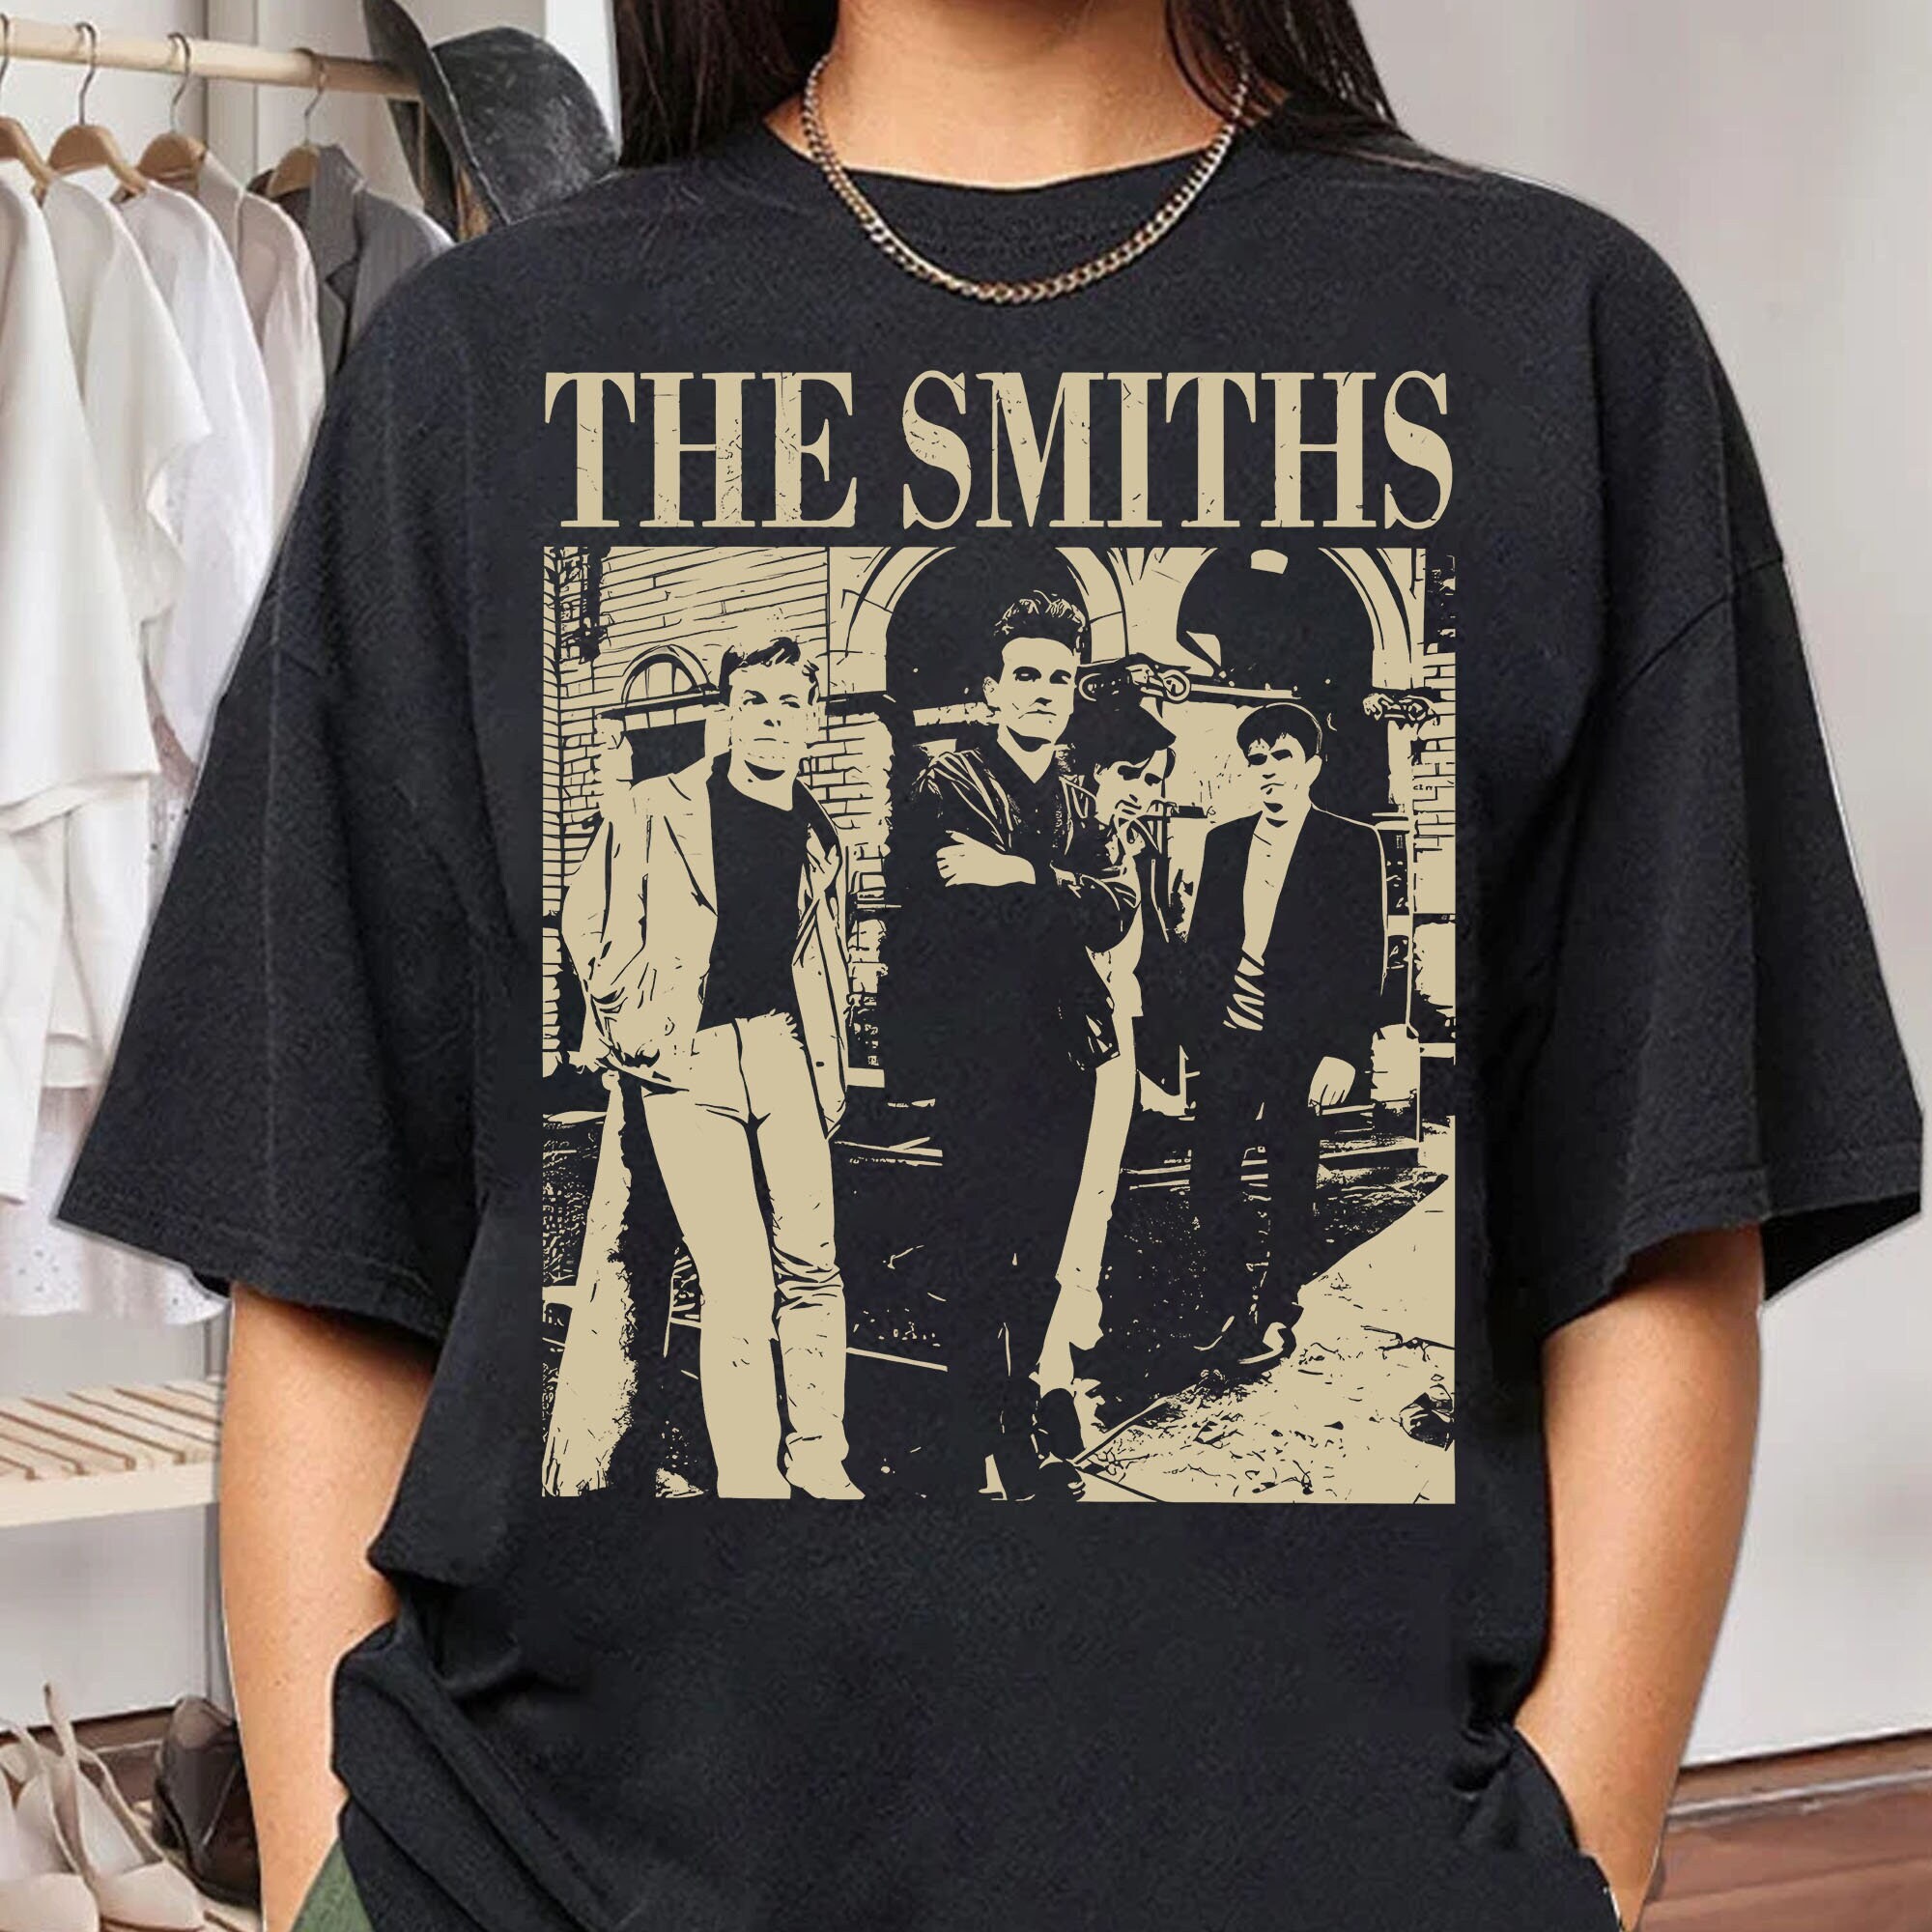 The Smiths T-shirt, The Smiths Album Tee, The Smiths band Gifft fan unisex t-shirt